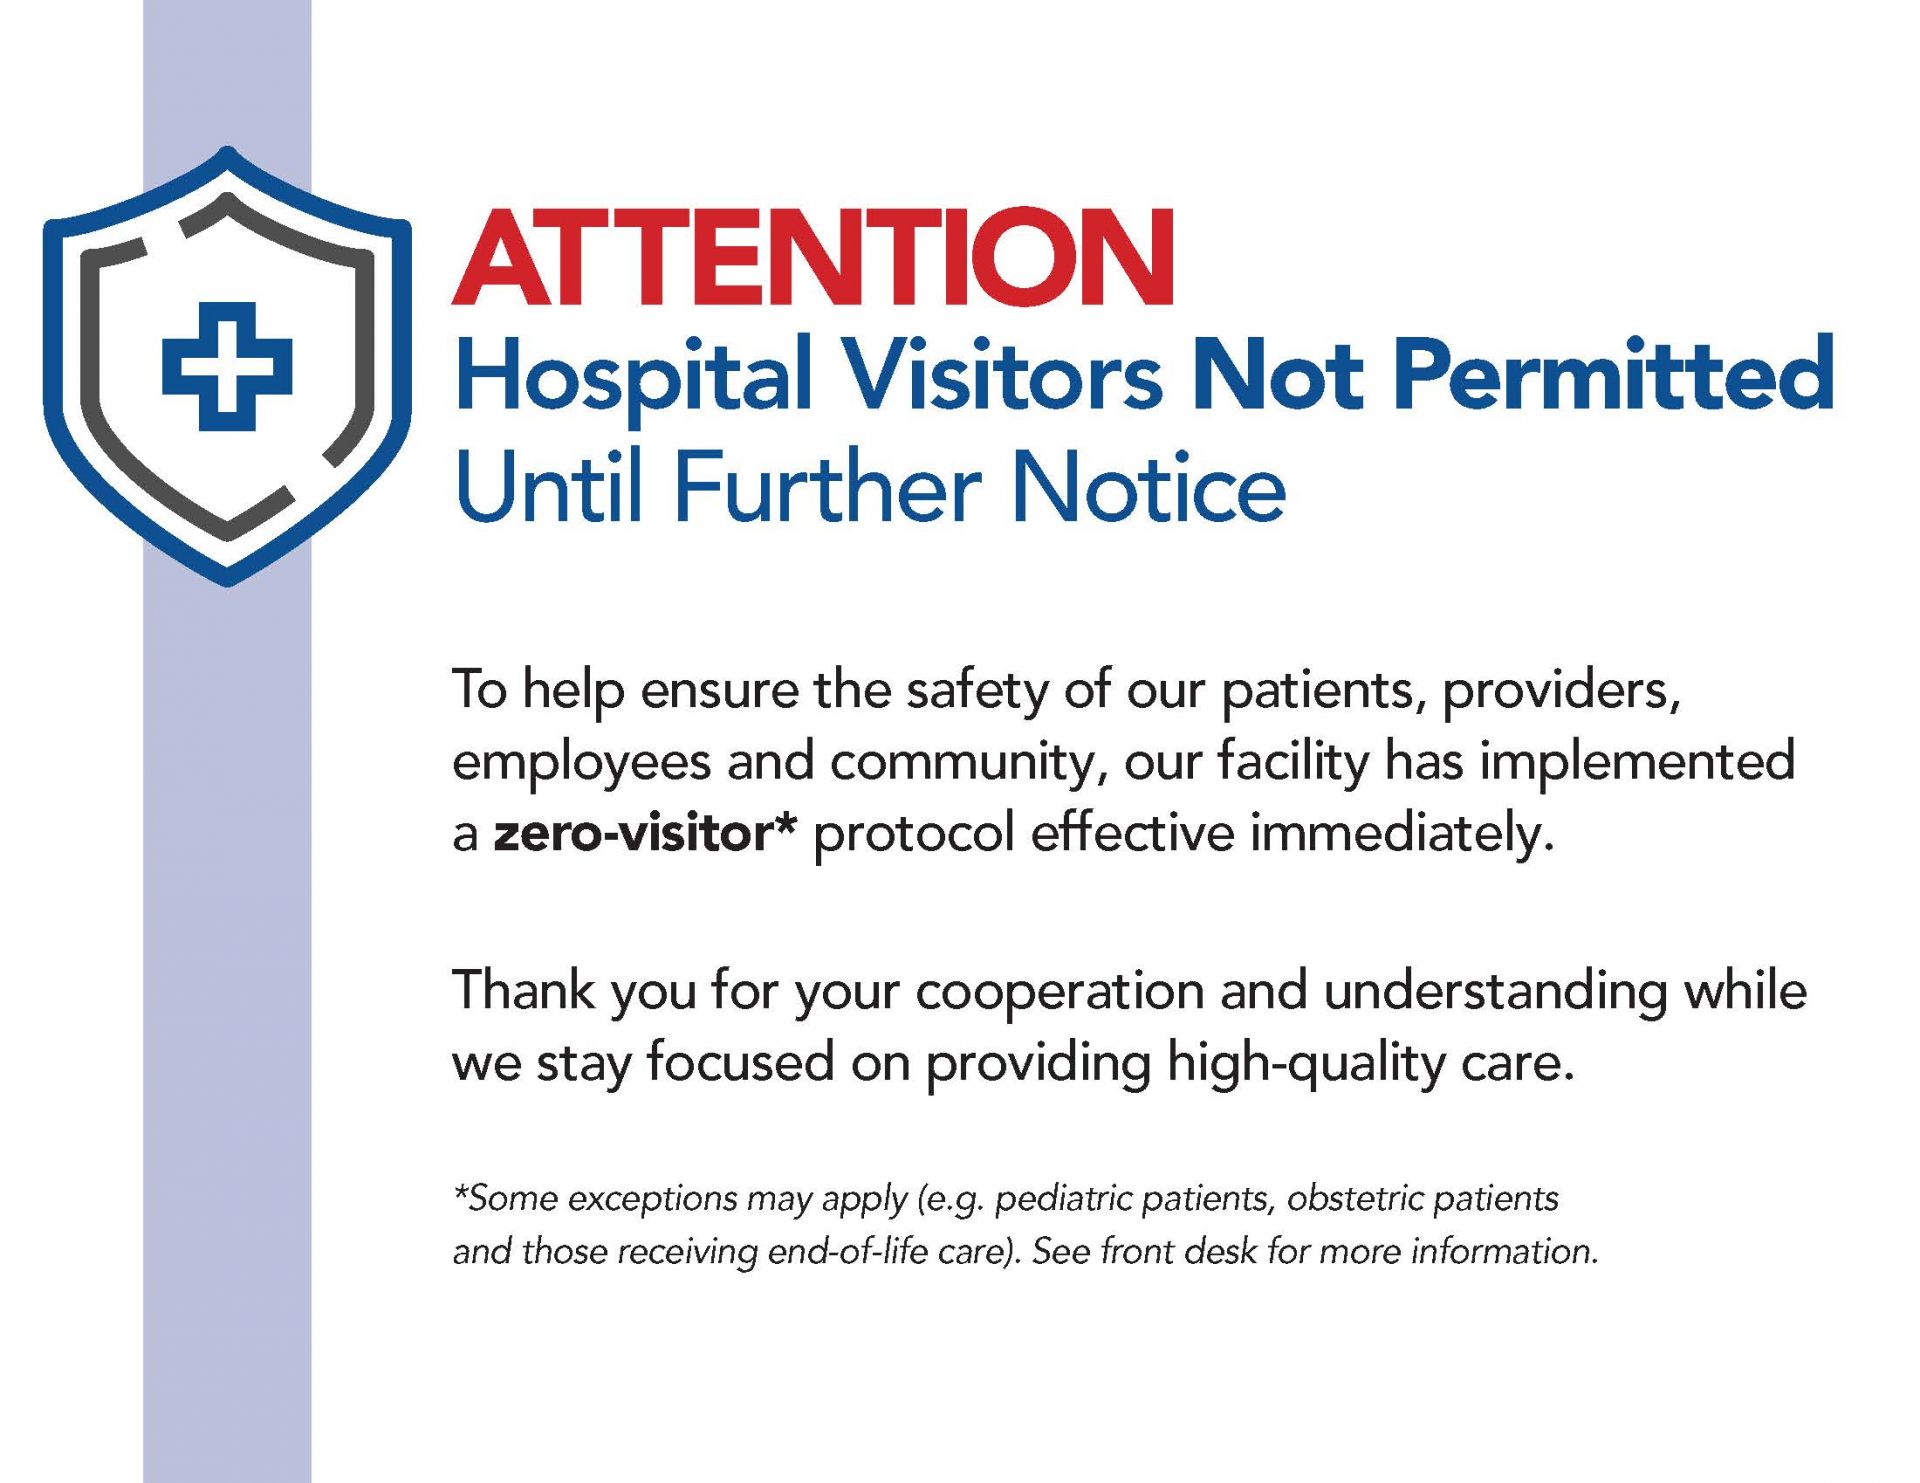 We want to reassure our communities that it is safe to come to the hospital should you or your family need care. LRMC continues to take the necessary precautions to ensure its facilities are safe and clean in accordance with CDC and state guidelines.  